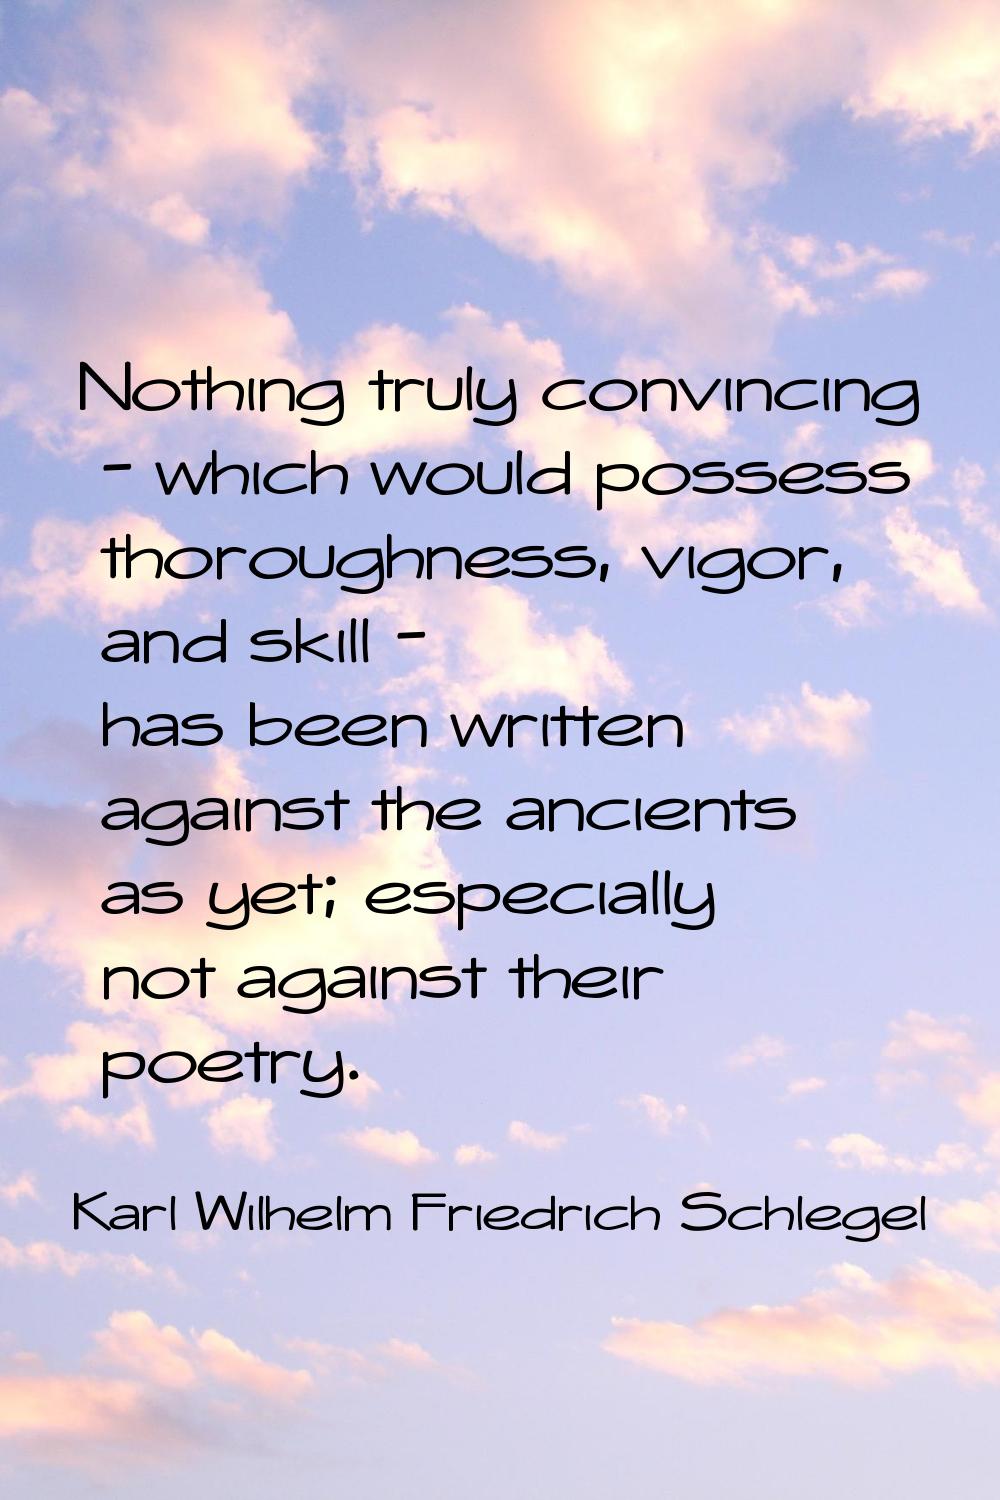 Nothing truly convincing - which would possess thoroughness, vigor, and skill - has been written ag